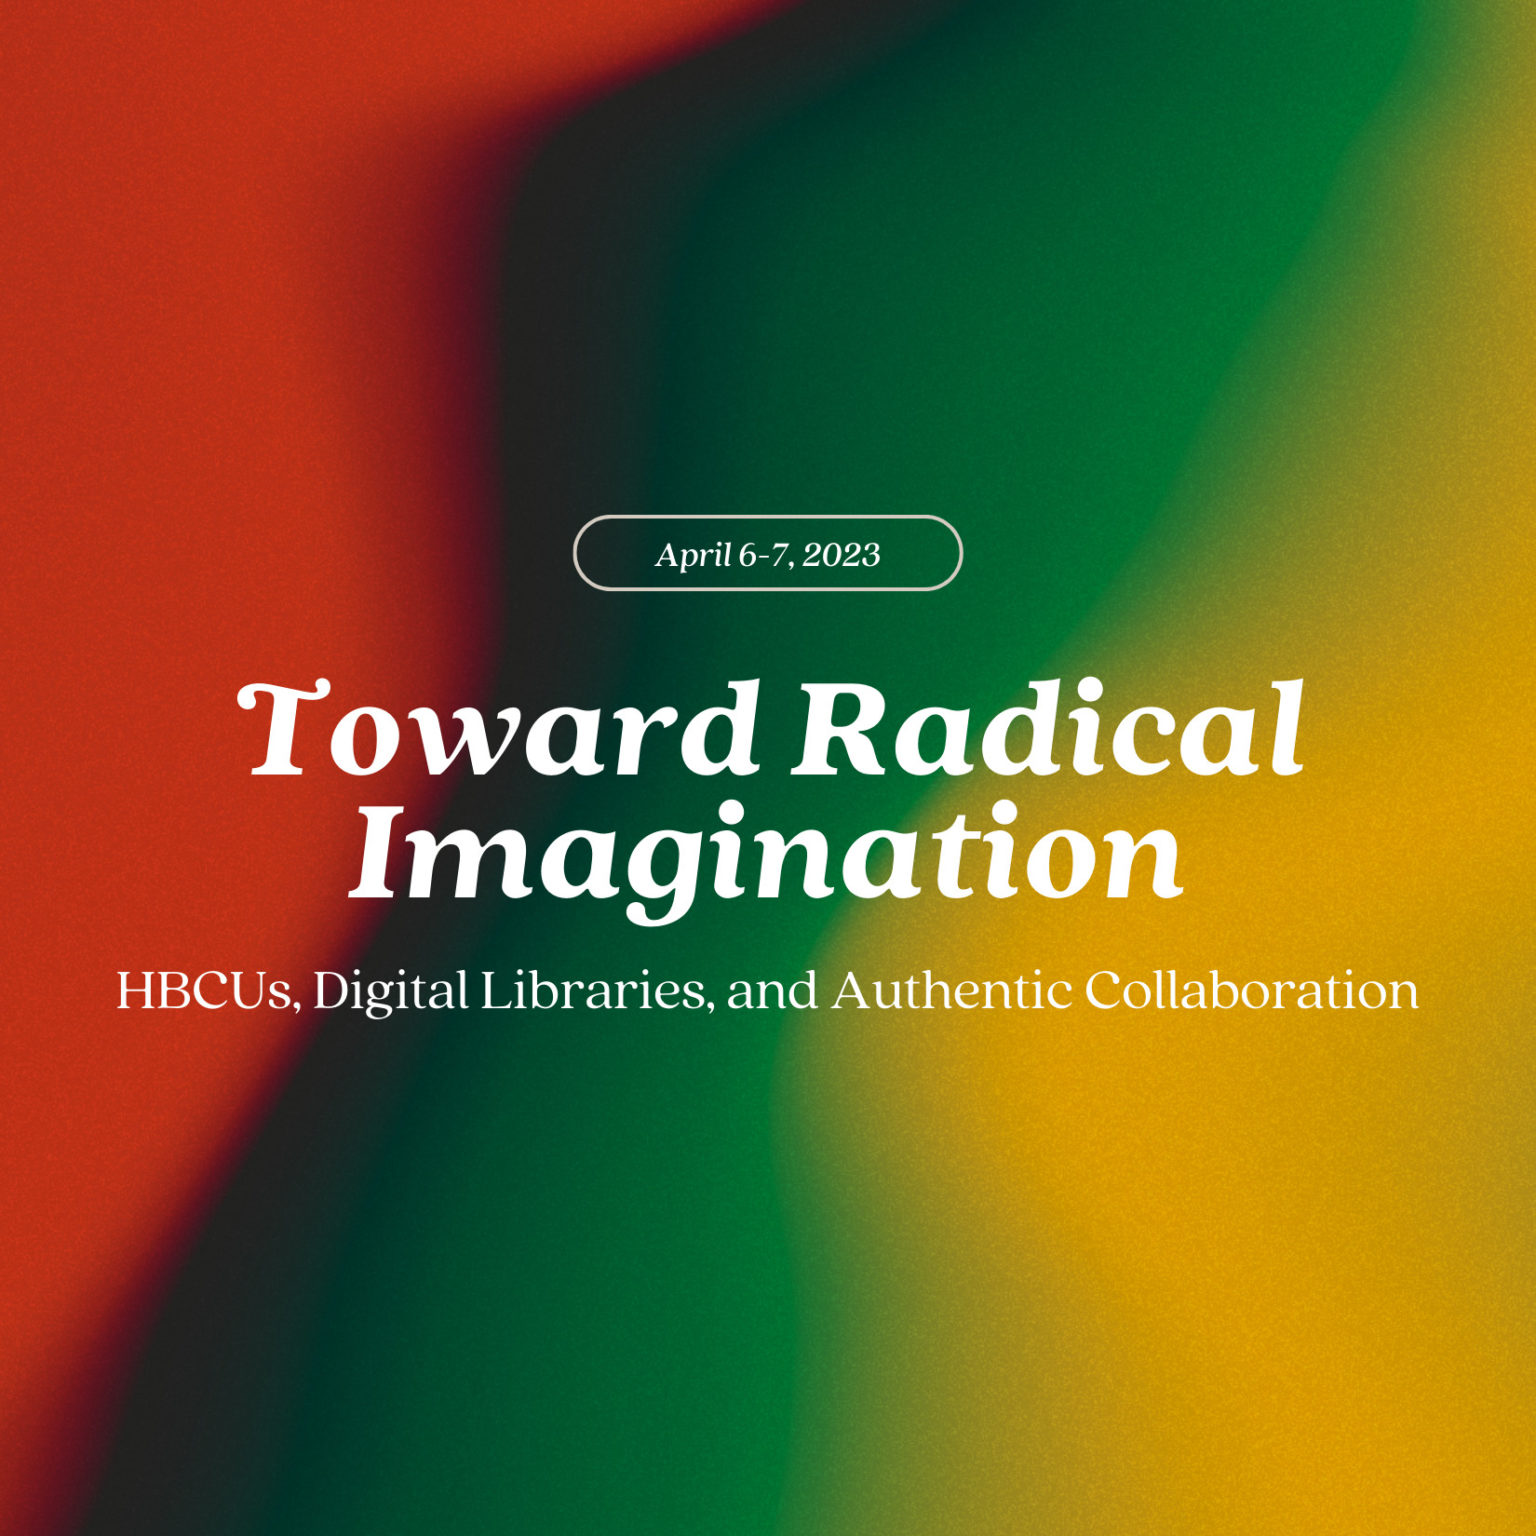 Graphic for Toward Radical Imagination with full title and subtitle at top. “A Virtual Convening, April 6-7, 2023, 11:00am-4:30pm ET,” at bottom right corner and “Hosted by Digital Library Federation at CLIR + HBCU Library Alliance, Supported by IMLS” at bottom left corner. Text is cream colored. Background is a gradient image with red, dark brown, green, yellow colors.